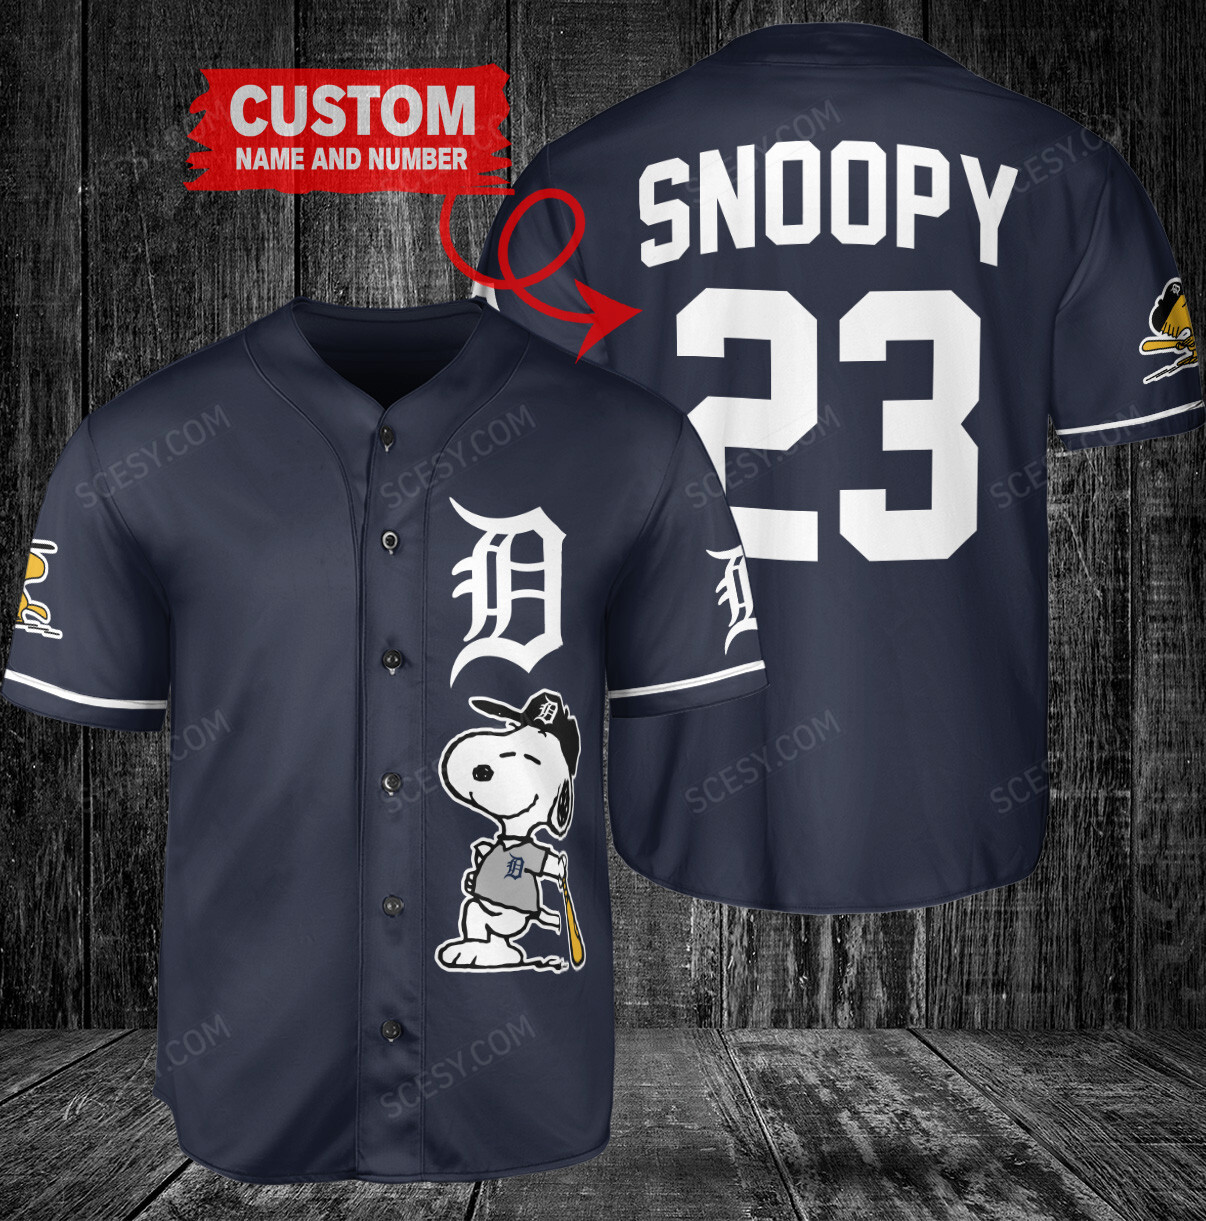 Get the Beyonce Navy Baseball Jersey - Detroit Tigers - Scesy